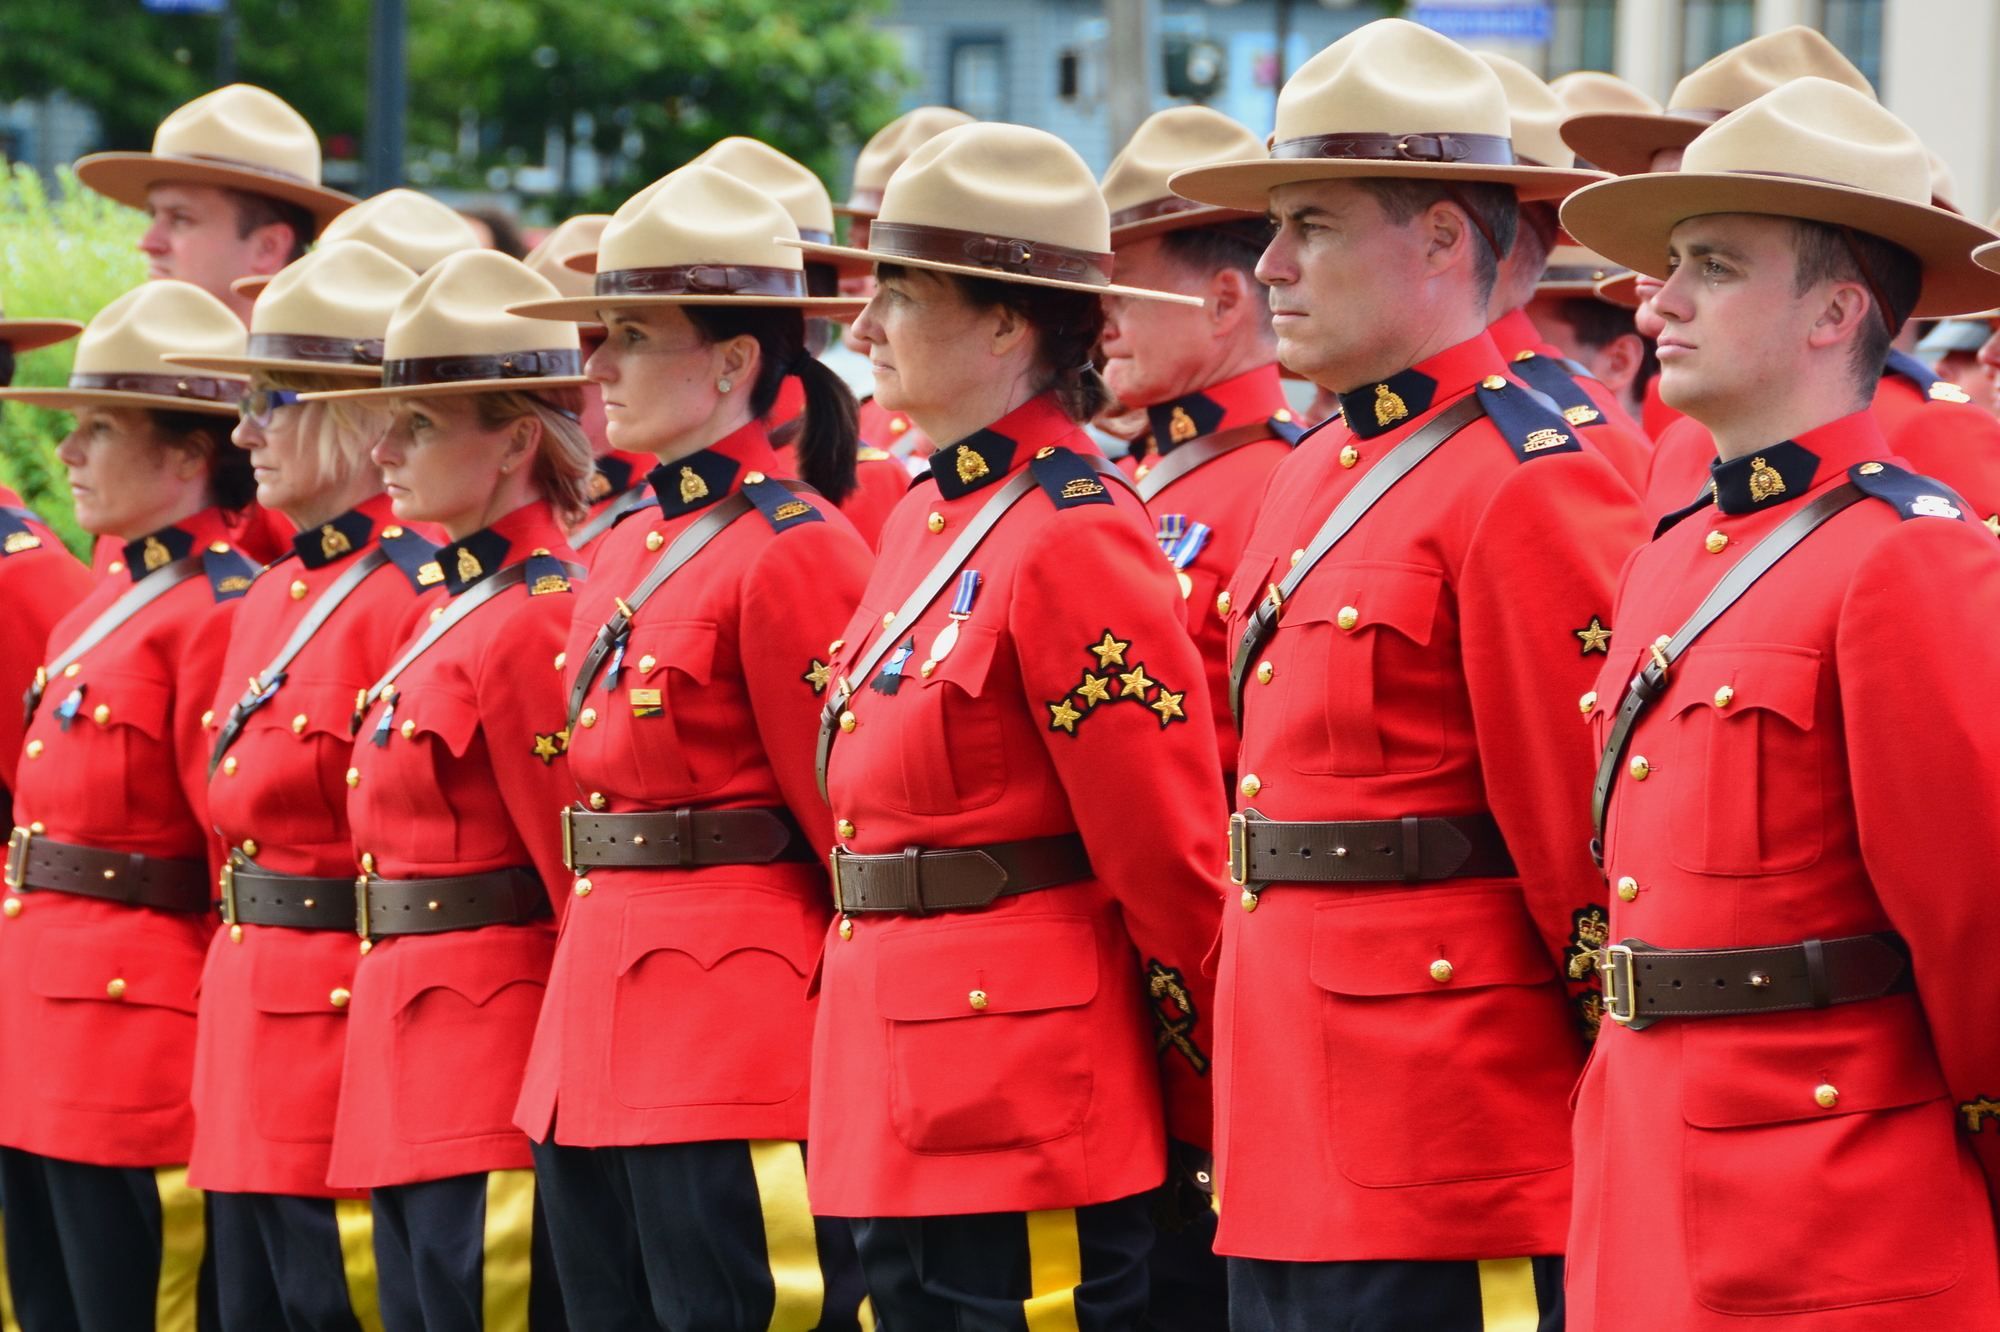 RCMP standing in a row regarding the RCMP class action lawsuit settlement opening for claims